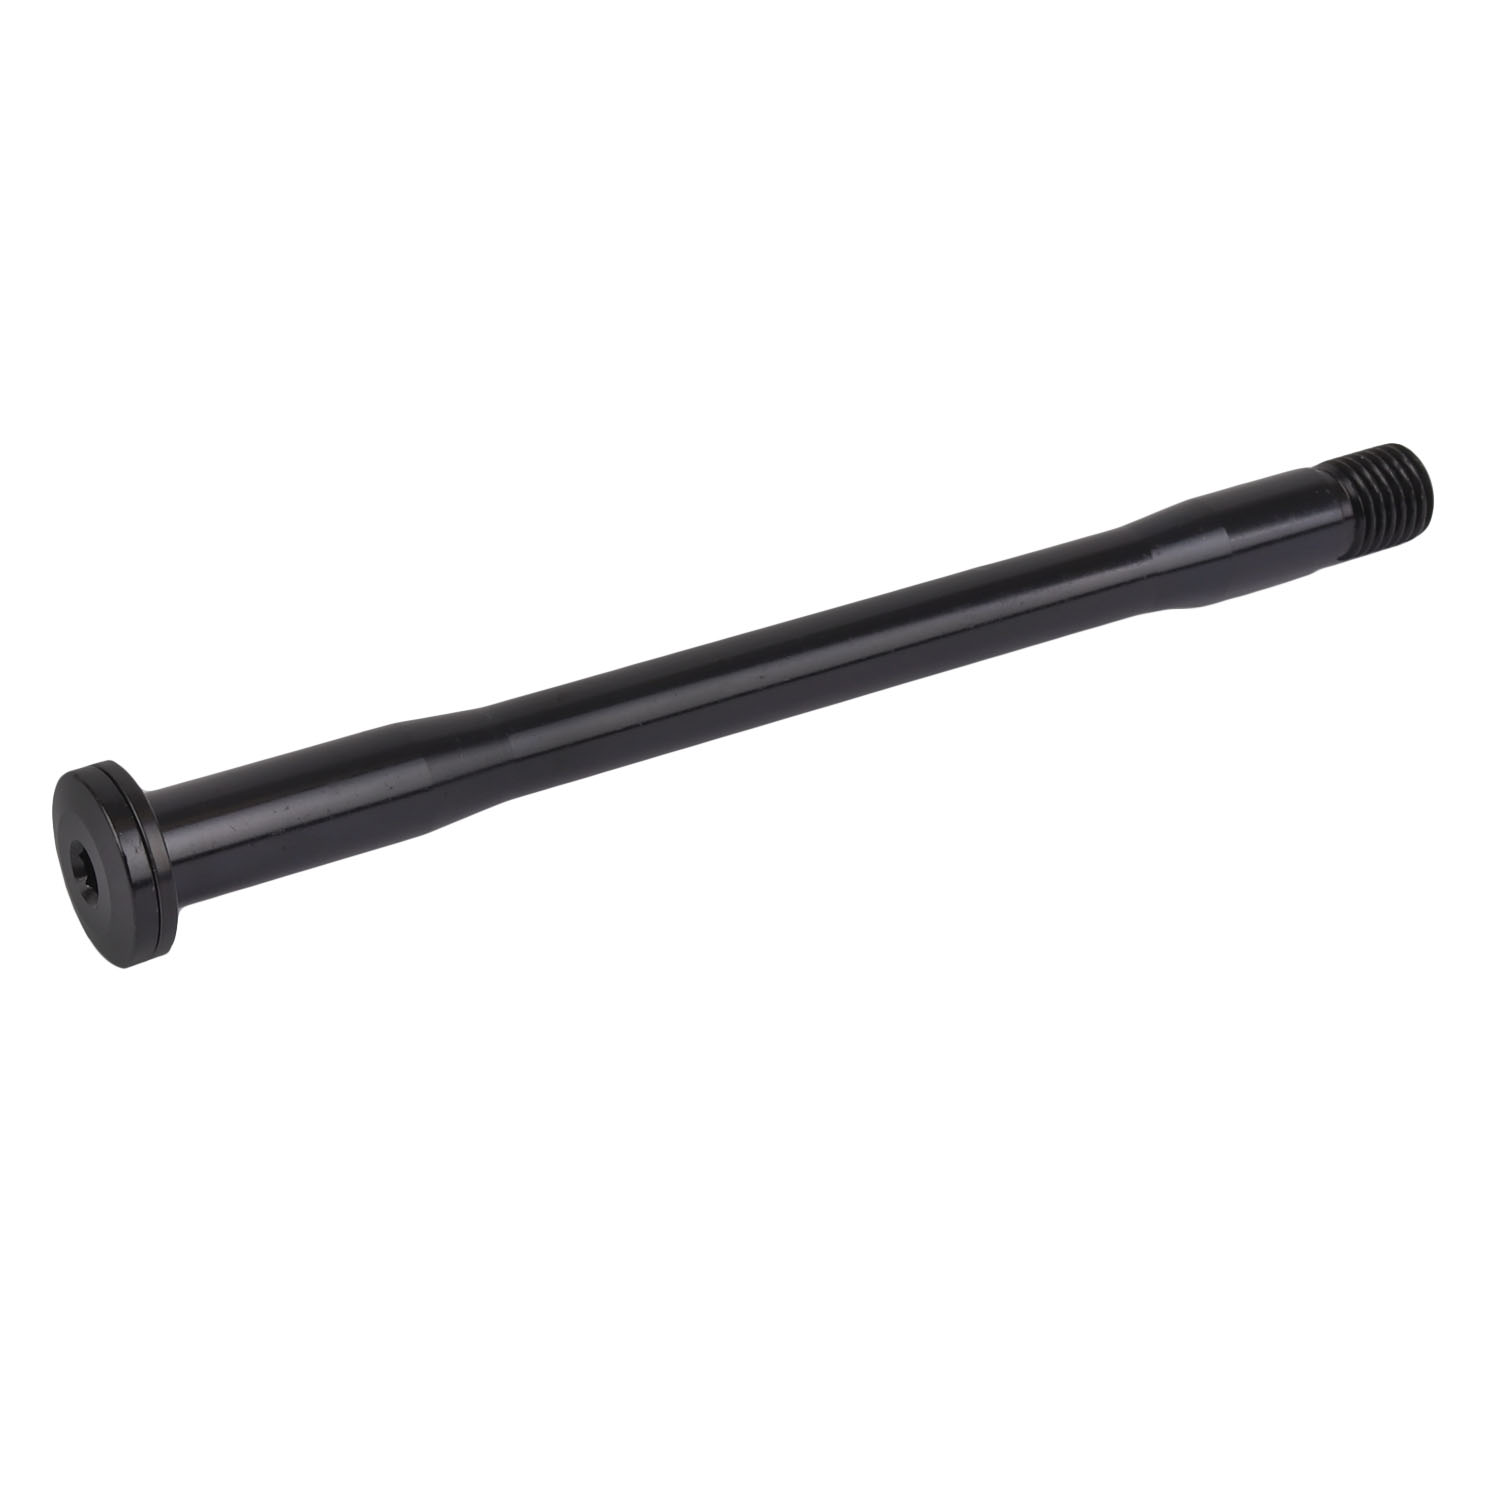 Picture of Giant Thru Axle - RW | 12x142mm - 160.8mm | for Defy / TCR - 1529-QRGA19-0003